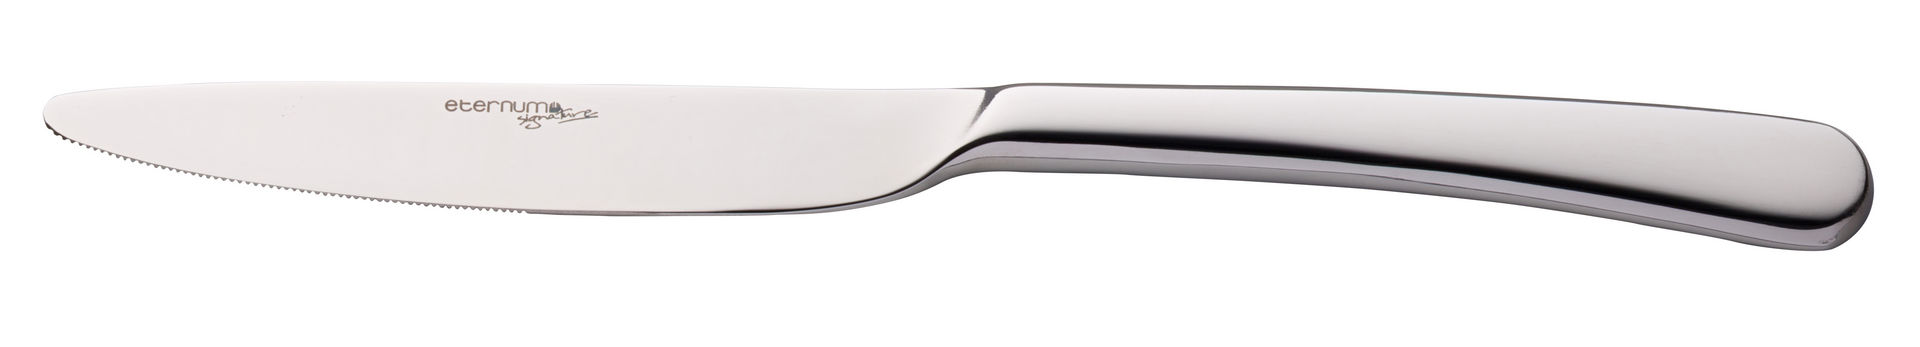 Ascot Table Knife - F34001-000000-B01012 (Pack of 12)